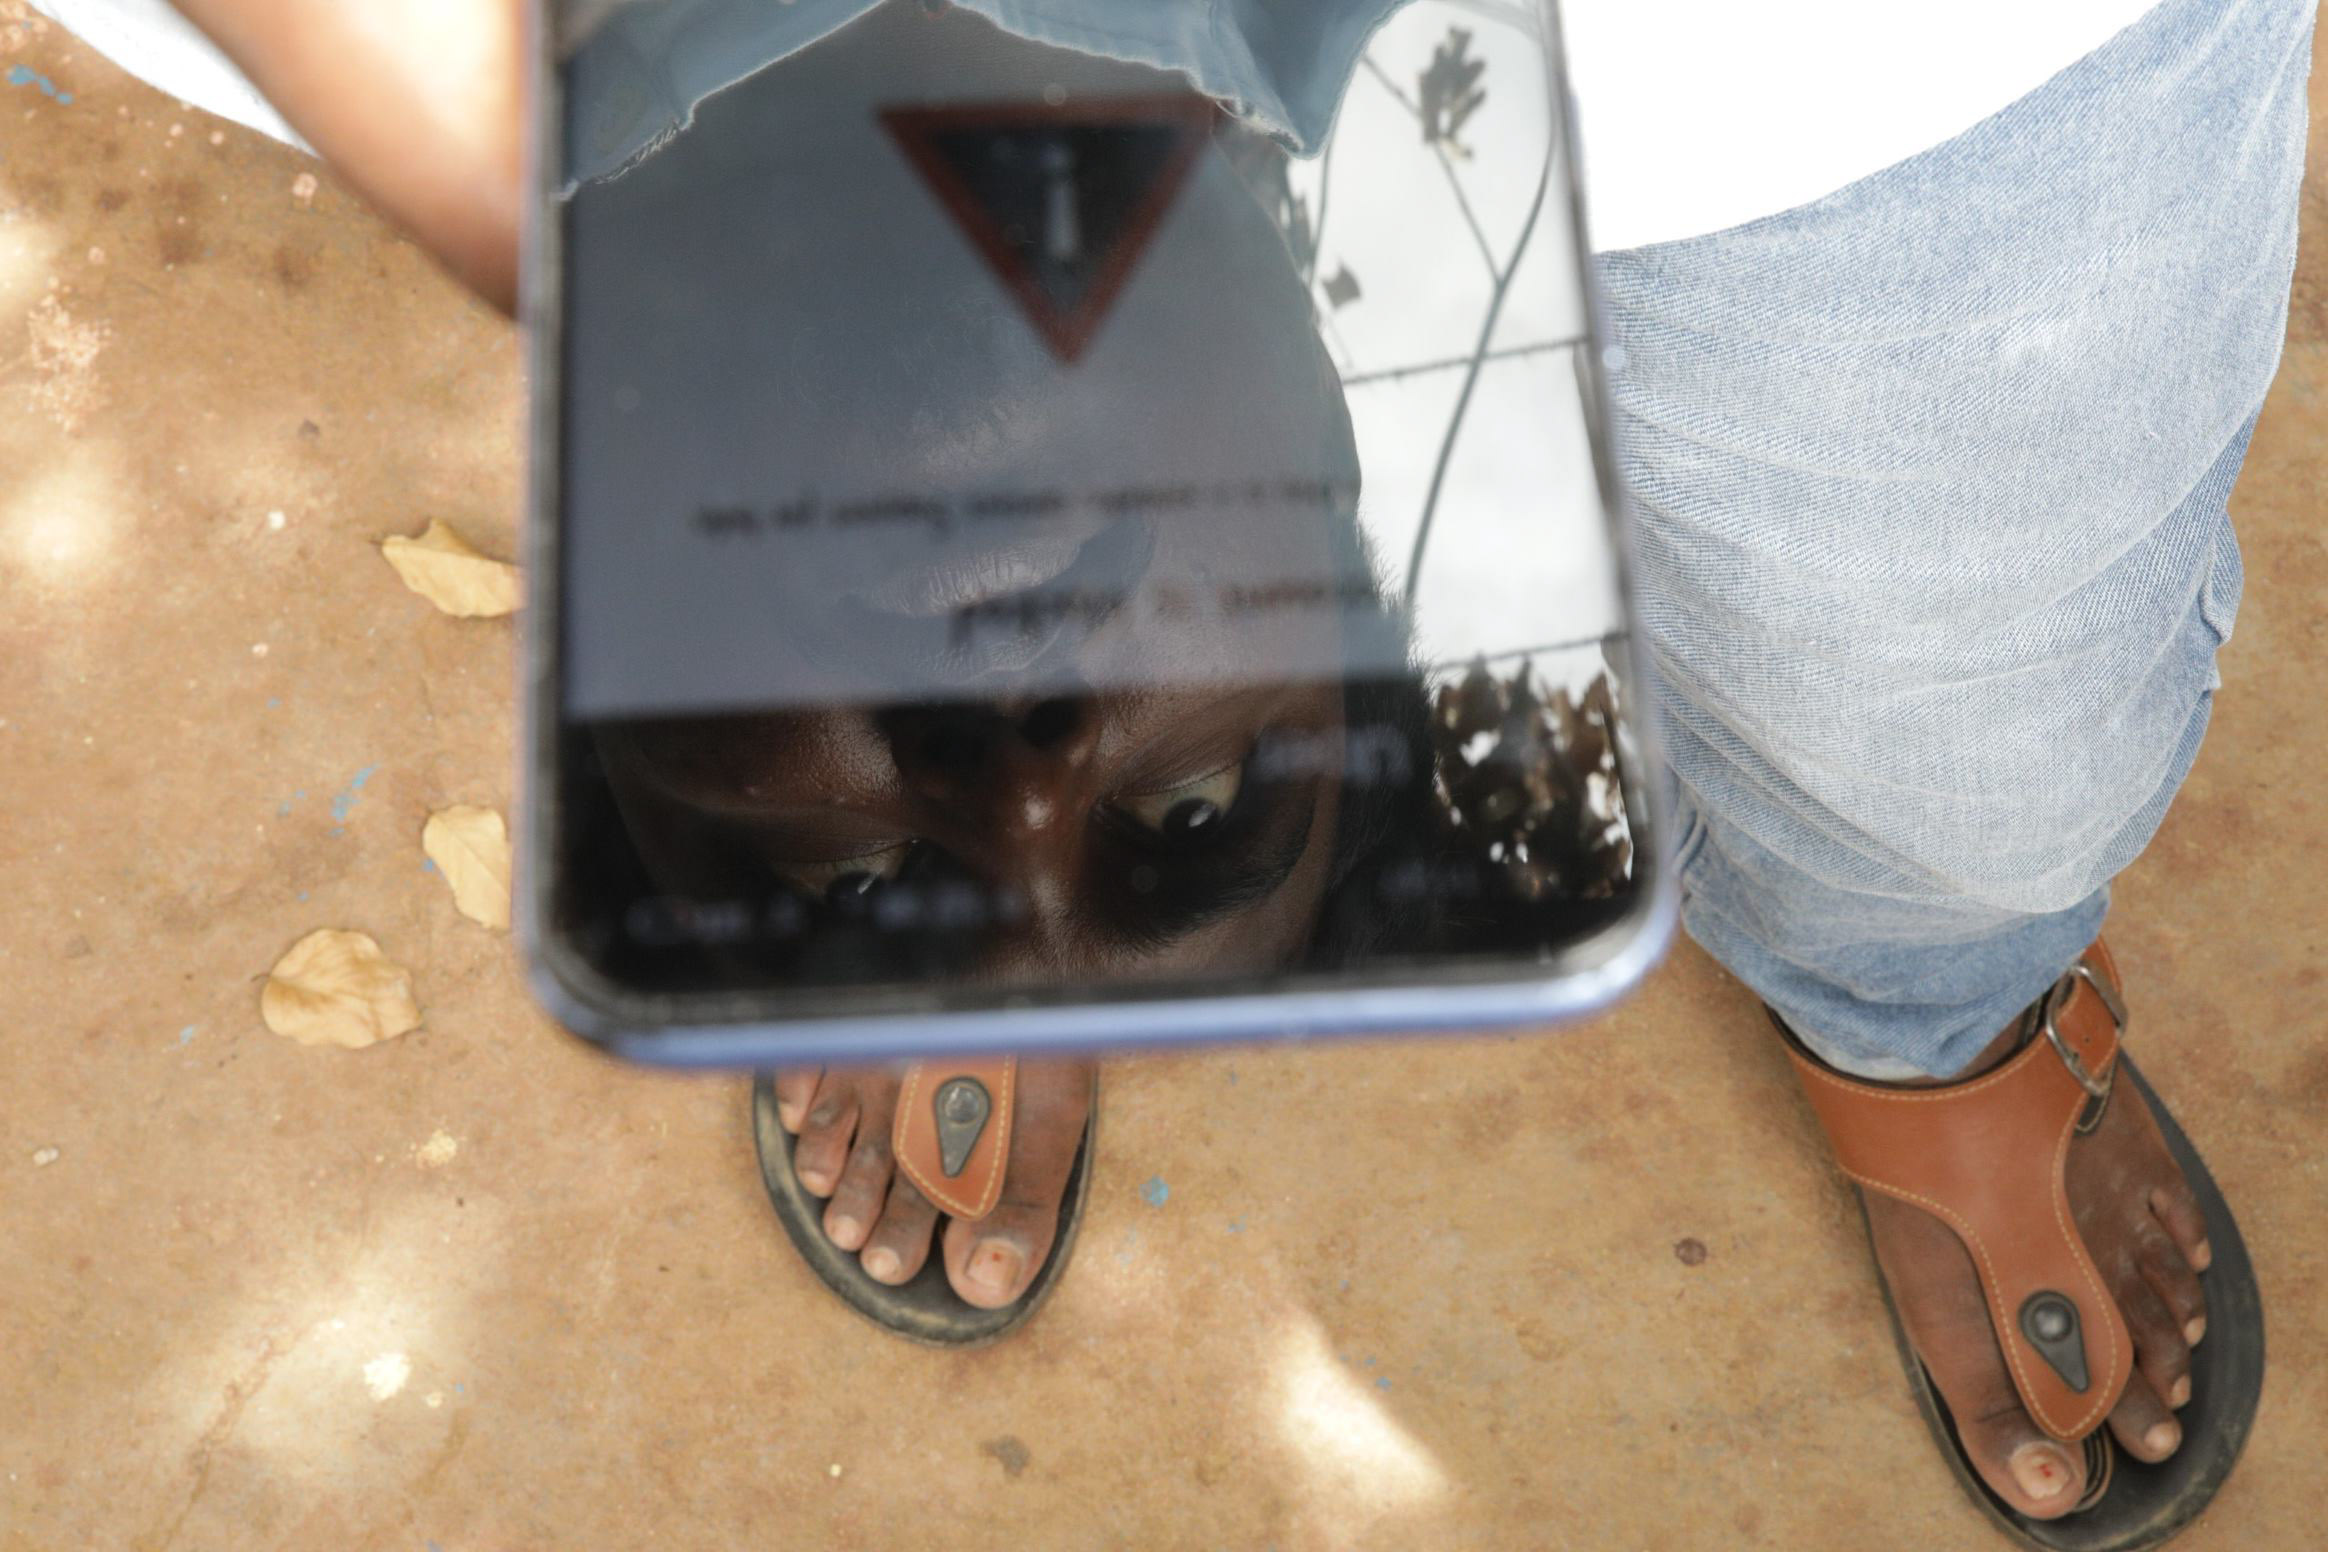 Srikanth's face reflected in his phone screen, which is on the lockout message from Uber